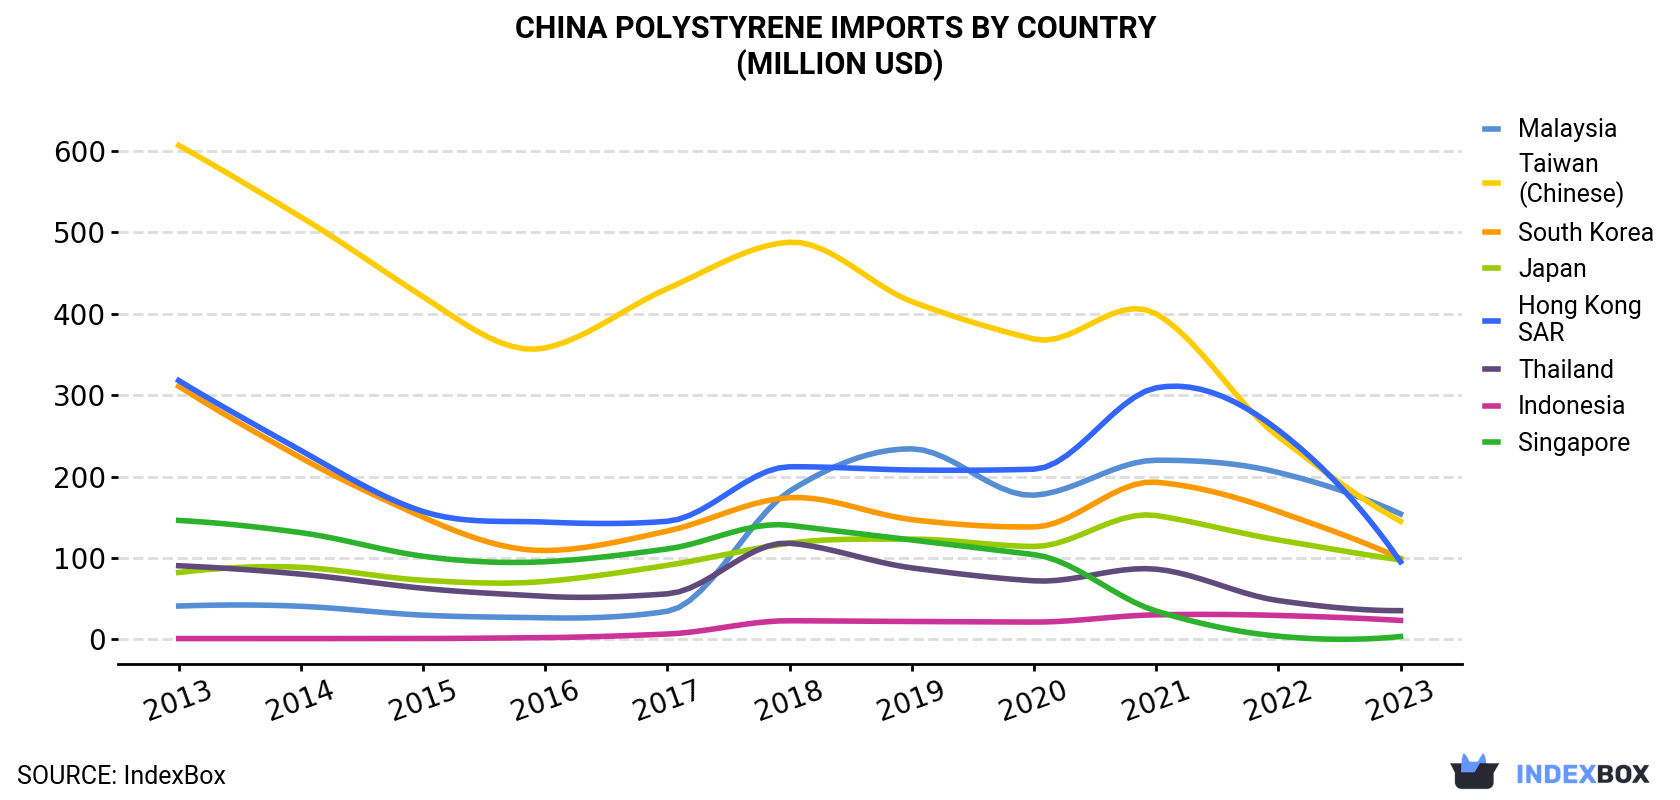 China Polystyrene Imports By Country (Million USD)